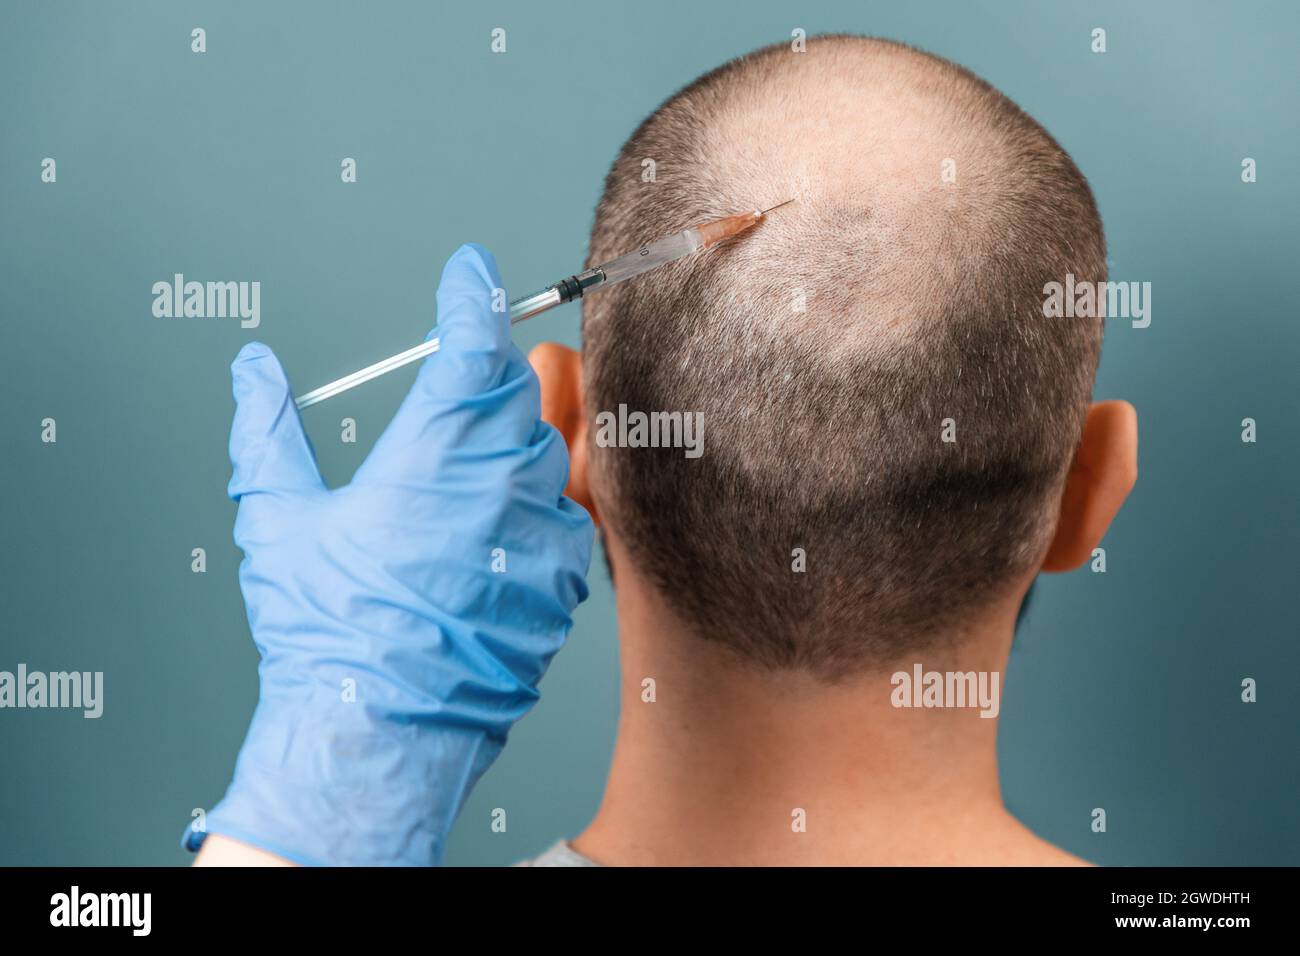 Mesotherapy. The trichologist doctor's hand makes an injection into the lesion of baldness. Back view. Turquoise background. The concept of aesthetic Stock Photo